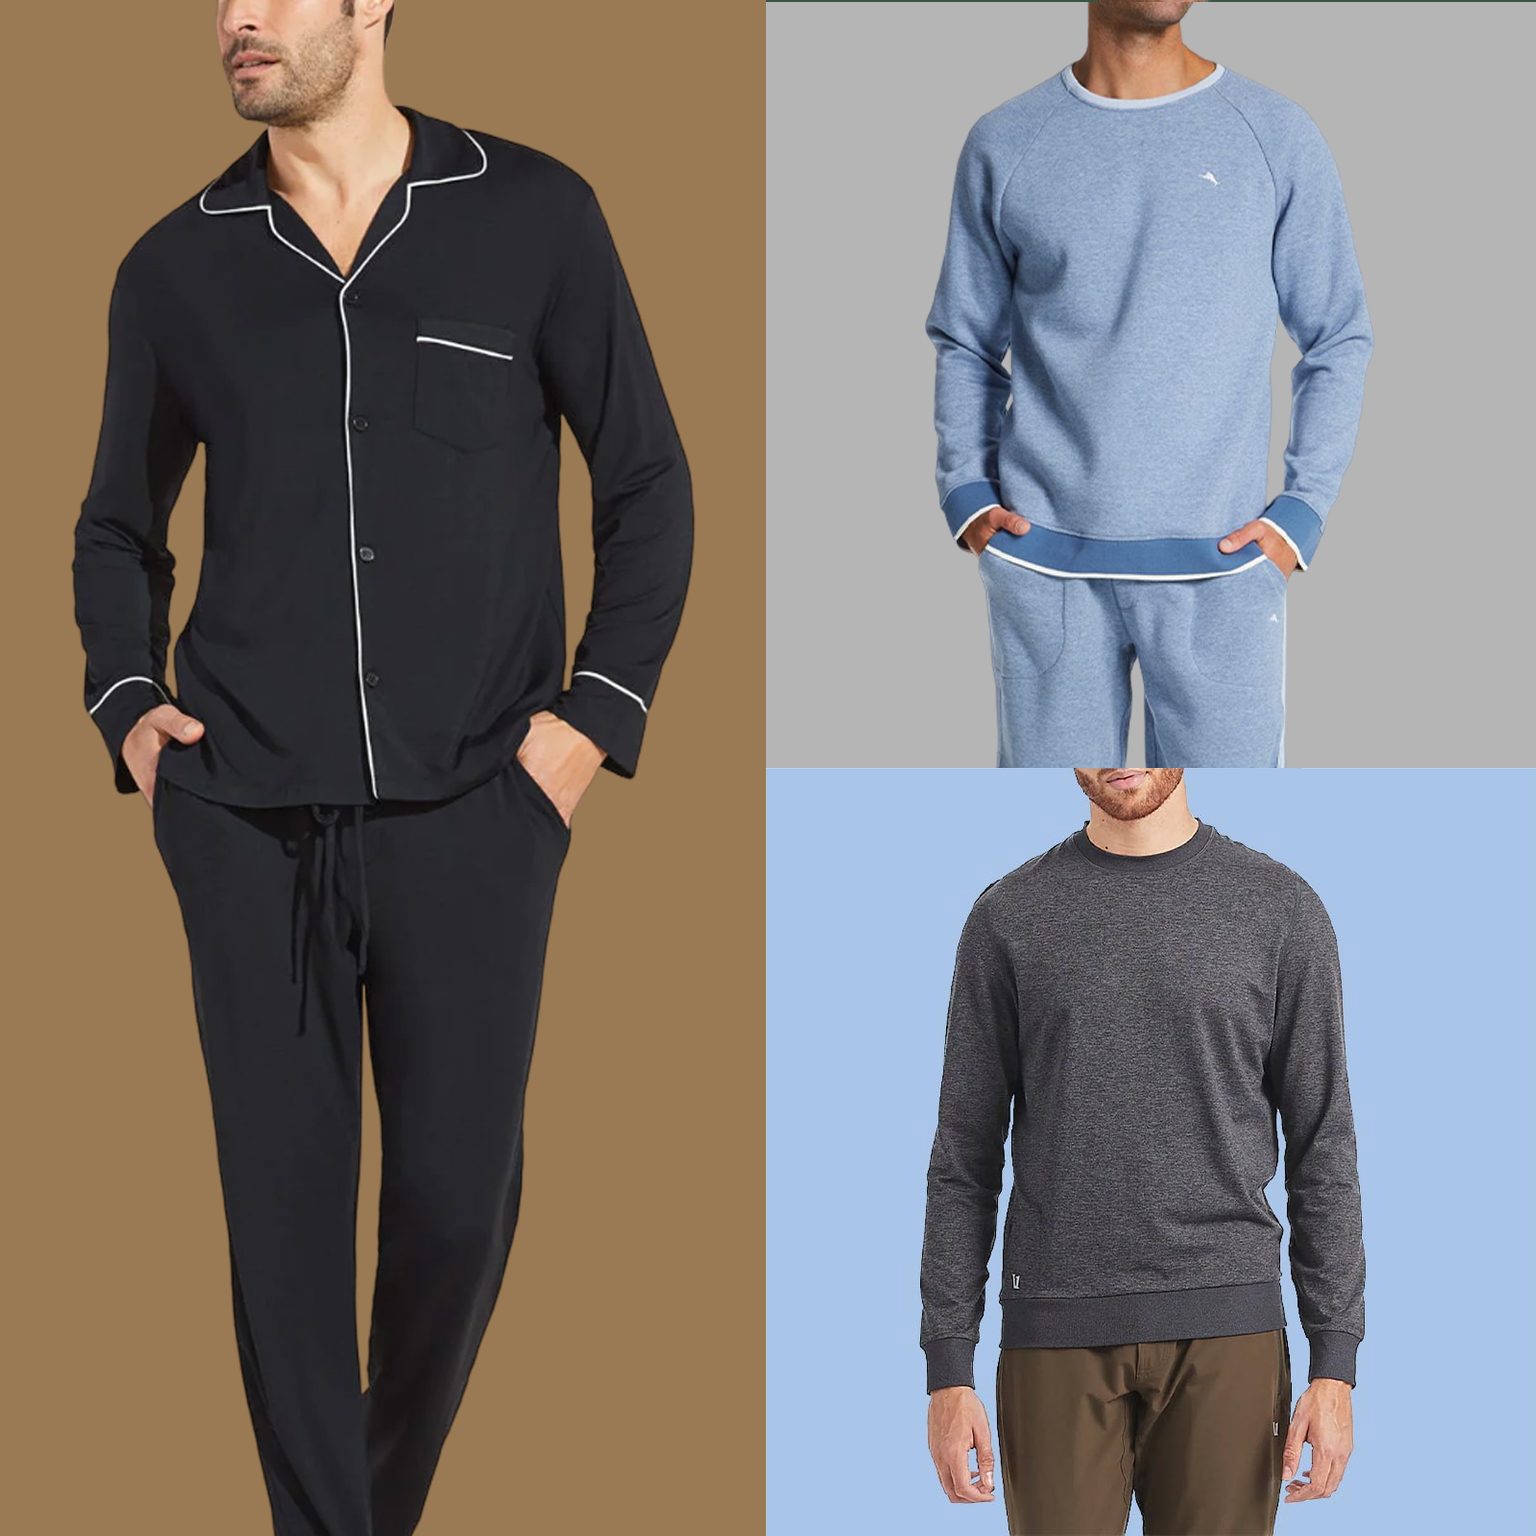 The 7 Best Men's Pajamas for the Best Sleep in 2023